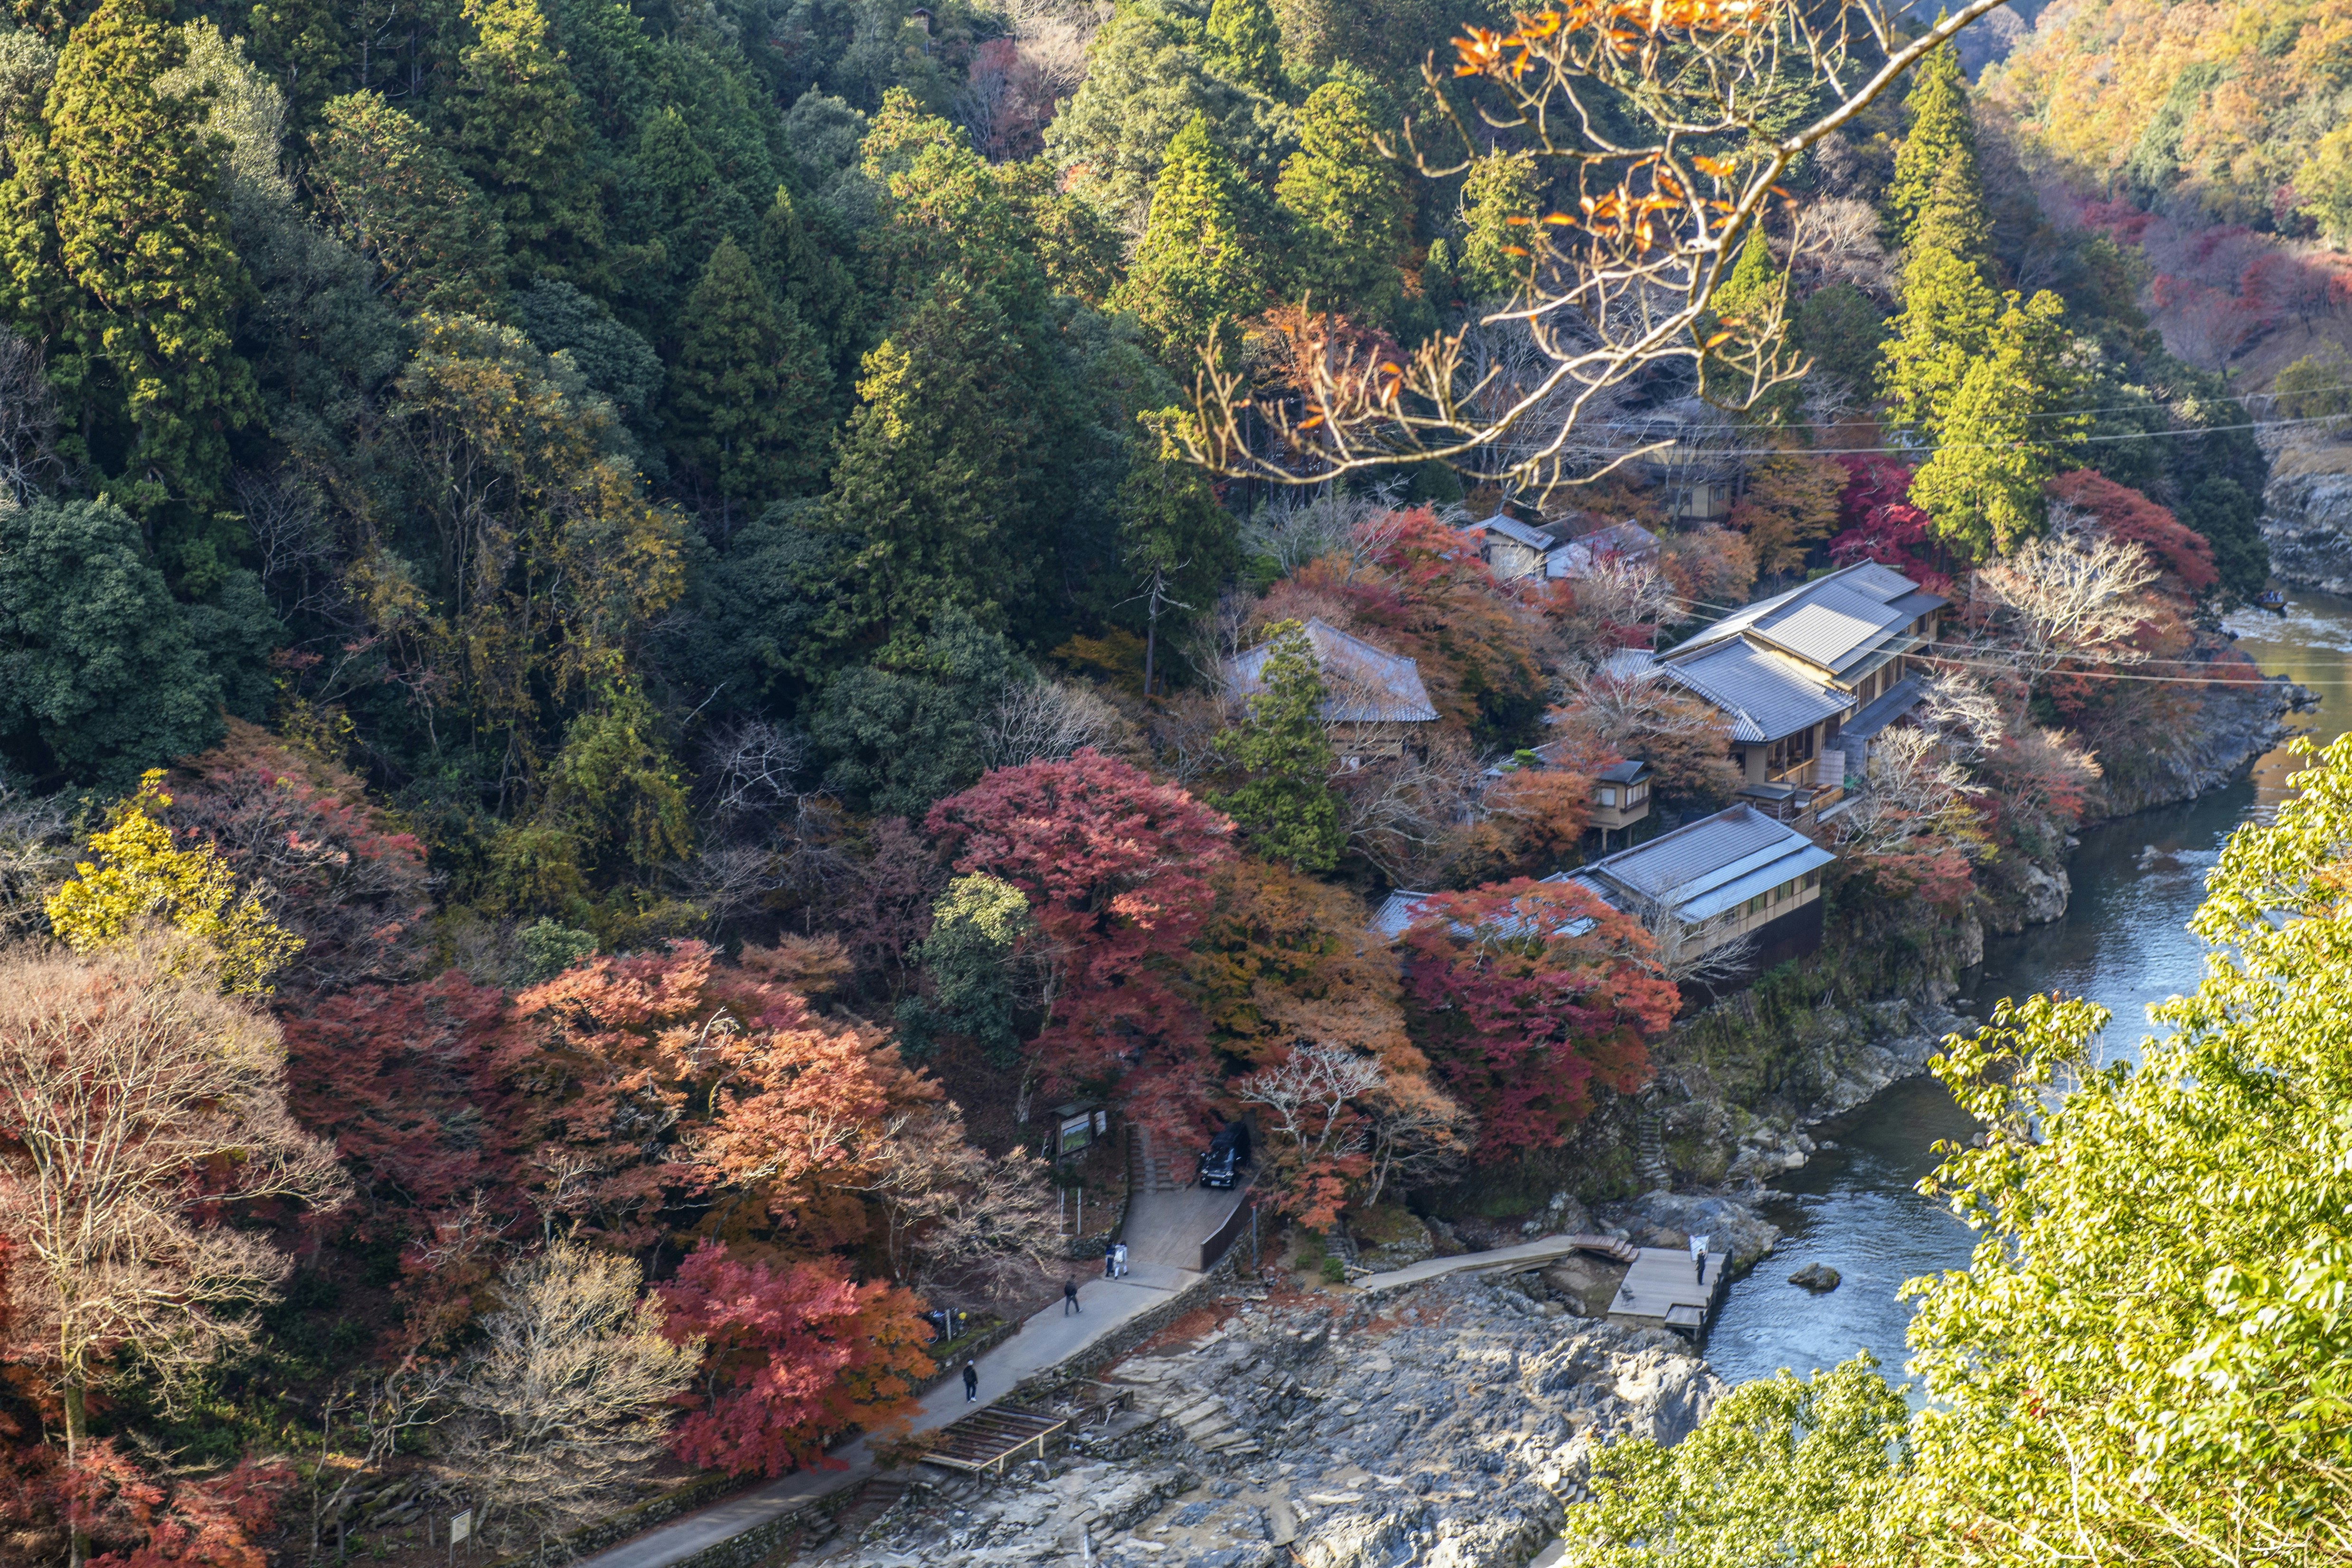 An aerial view of Hoshinoya hotel in Kyoto. The hotel is hidden amongst the trees and located on the banks of a river.